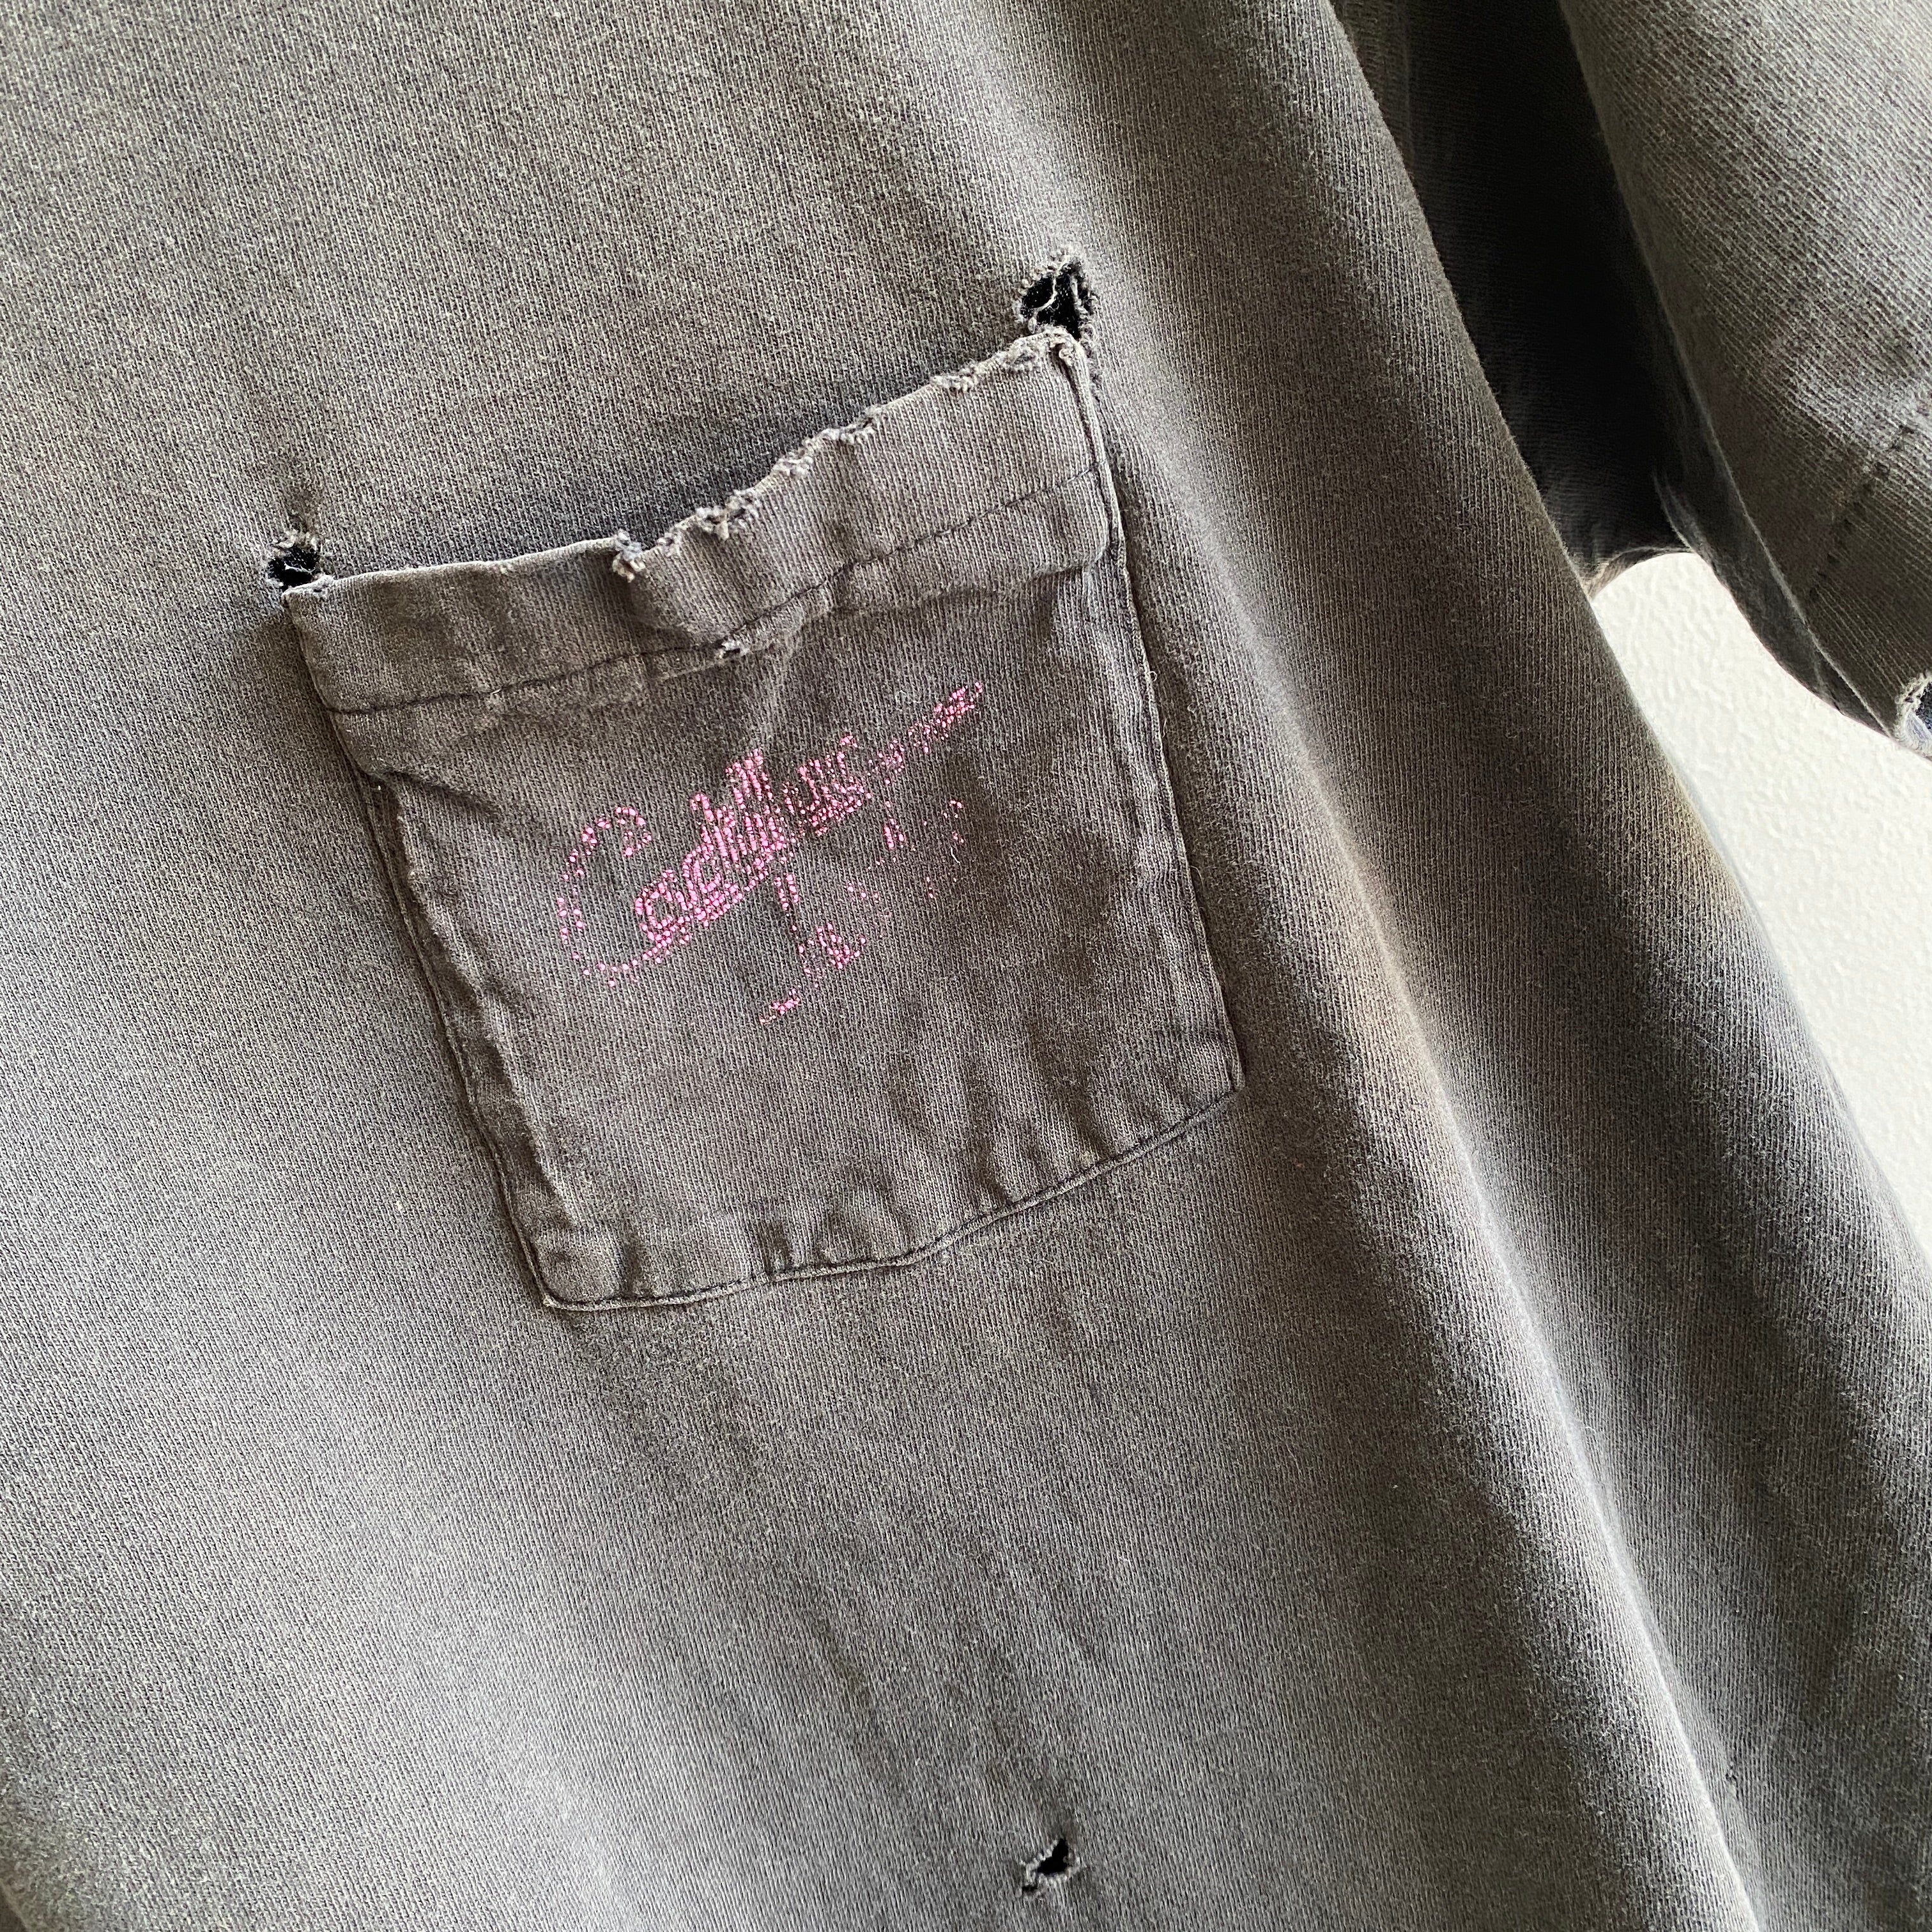 Cadillac Jack's Ultra Faded and Beat Up Pocket Tee des années 1980 - The Backside Too !!